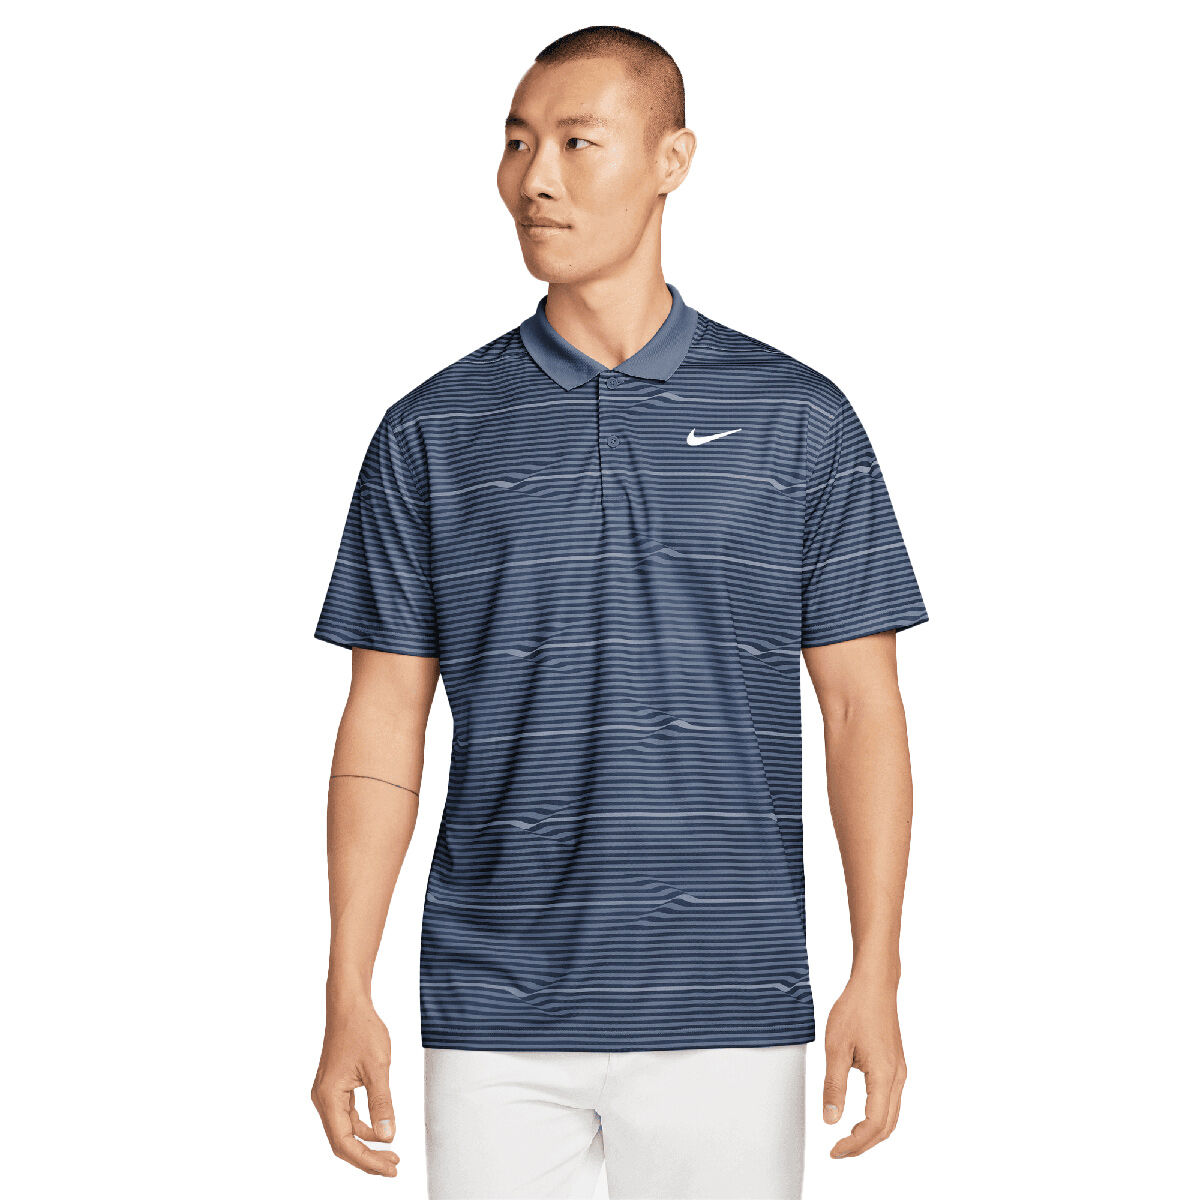 Nike Men’s Victory+ Ripple Golf Polo Shirt, Mens, Midnight navy/diffused blue/wh, Large | American Golf